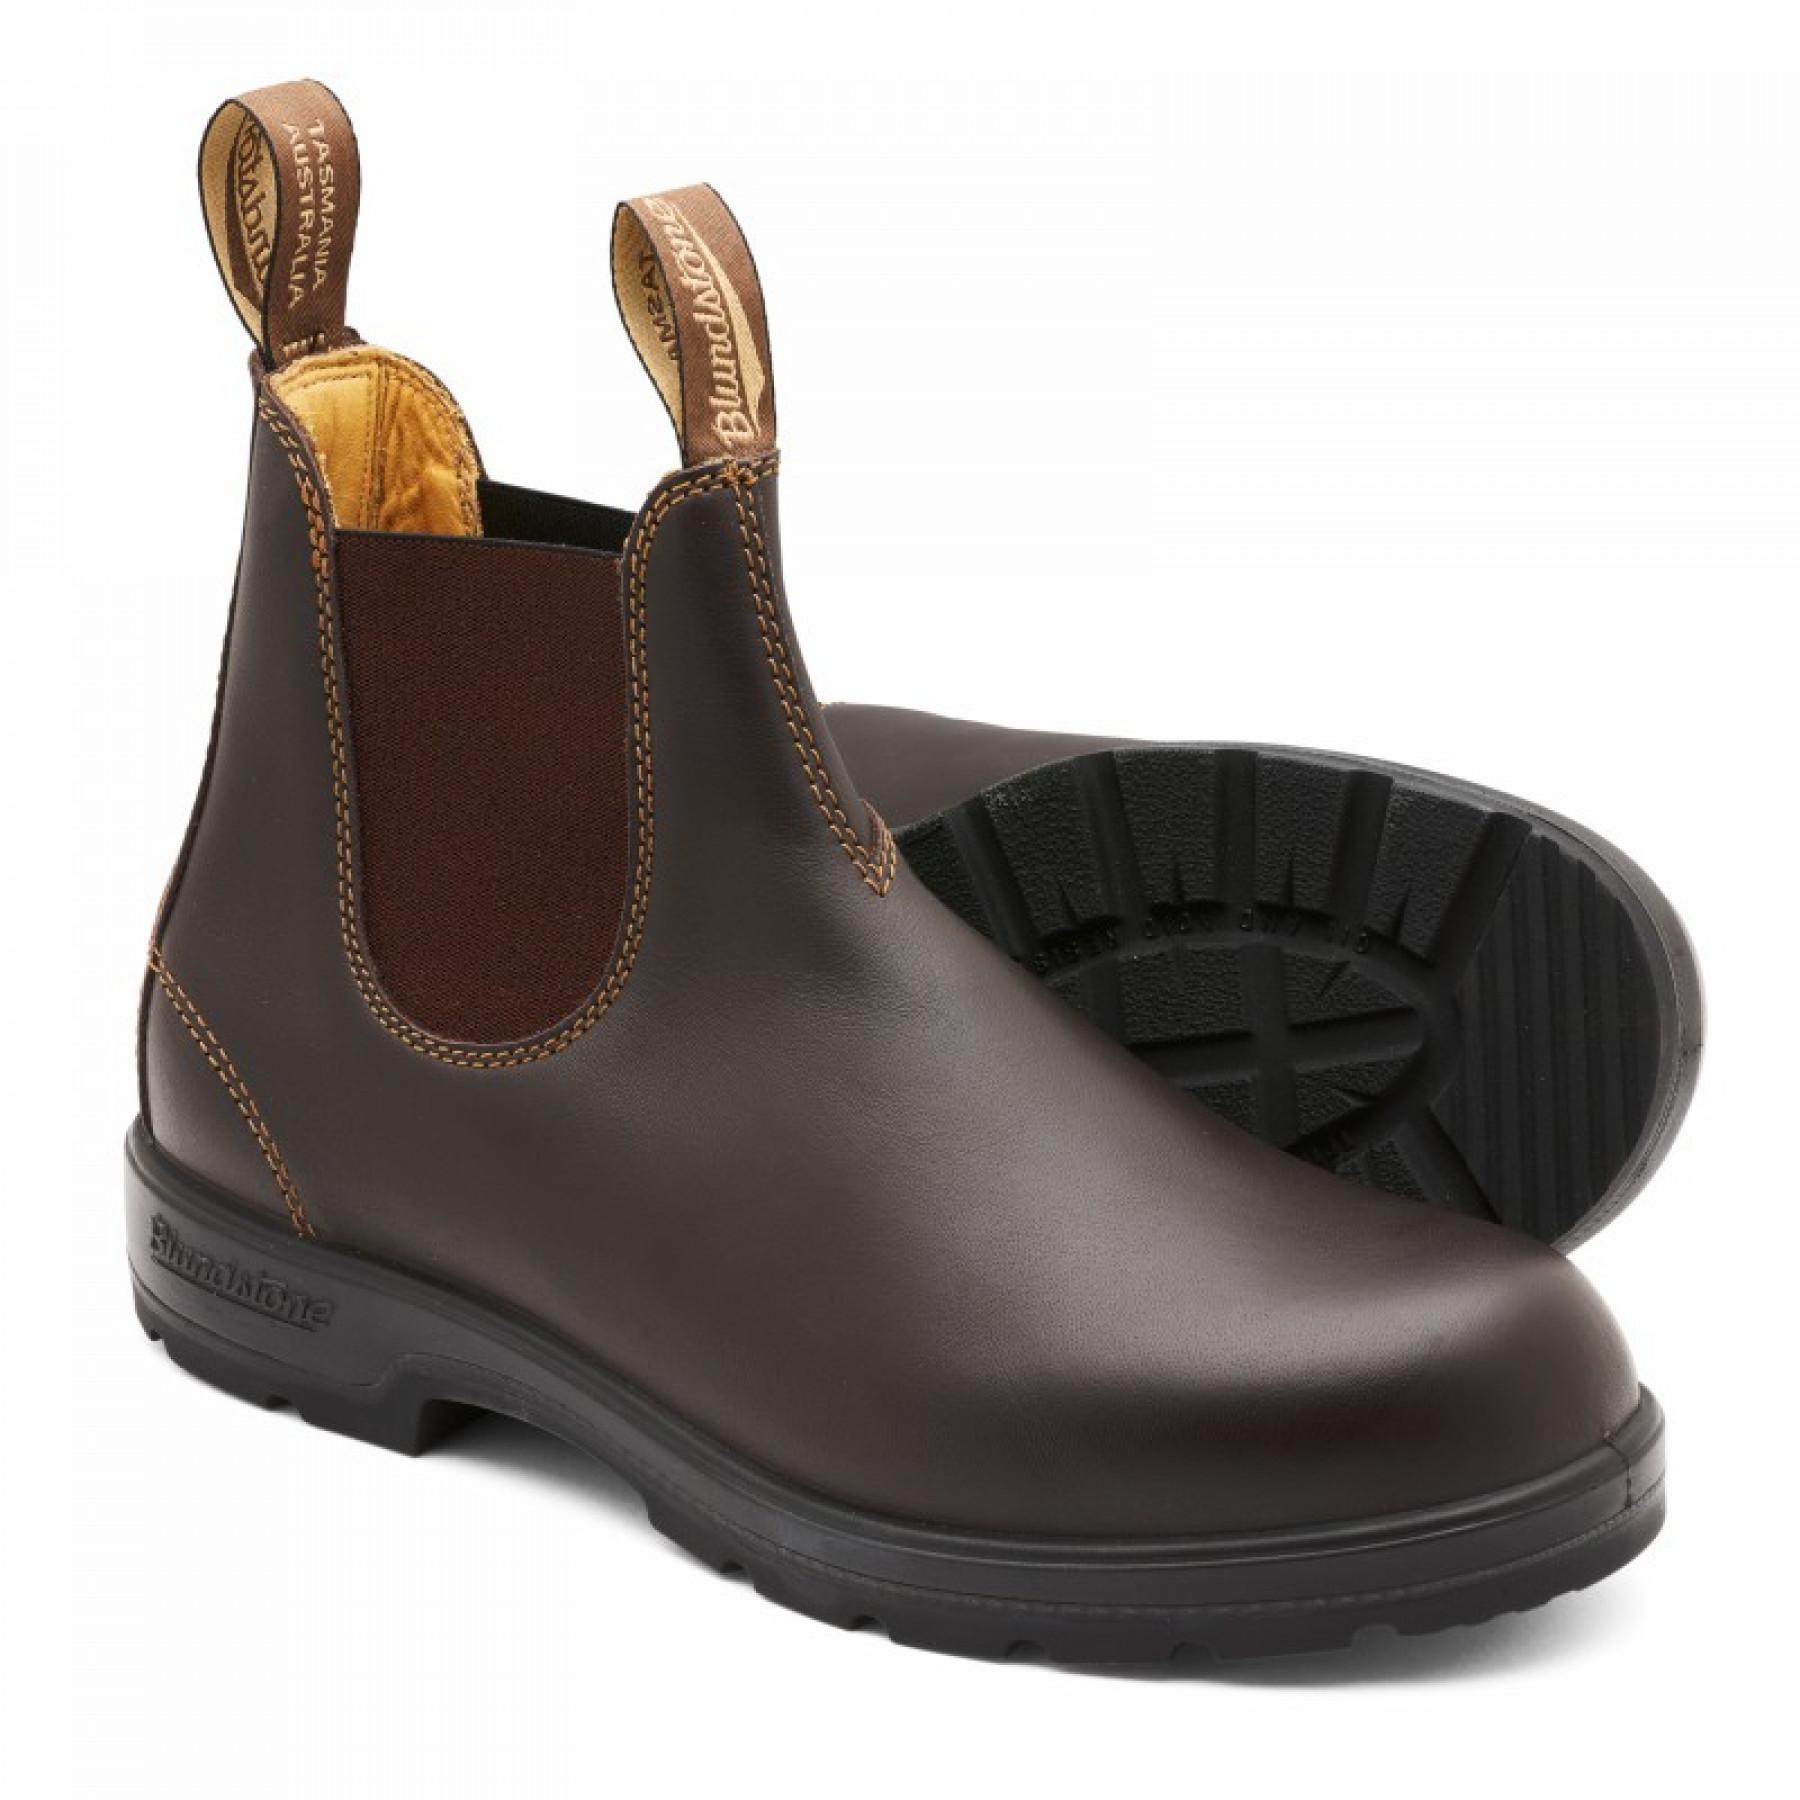 Shoes Blundstone Classic Chelsea Boots 550 Walnut Brown